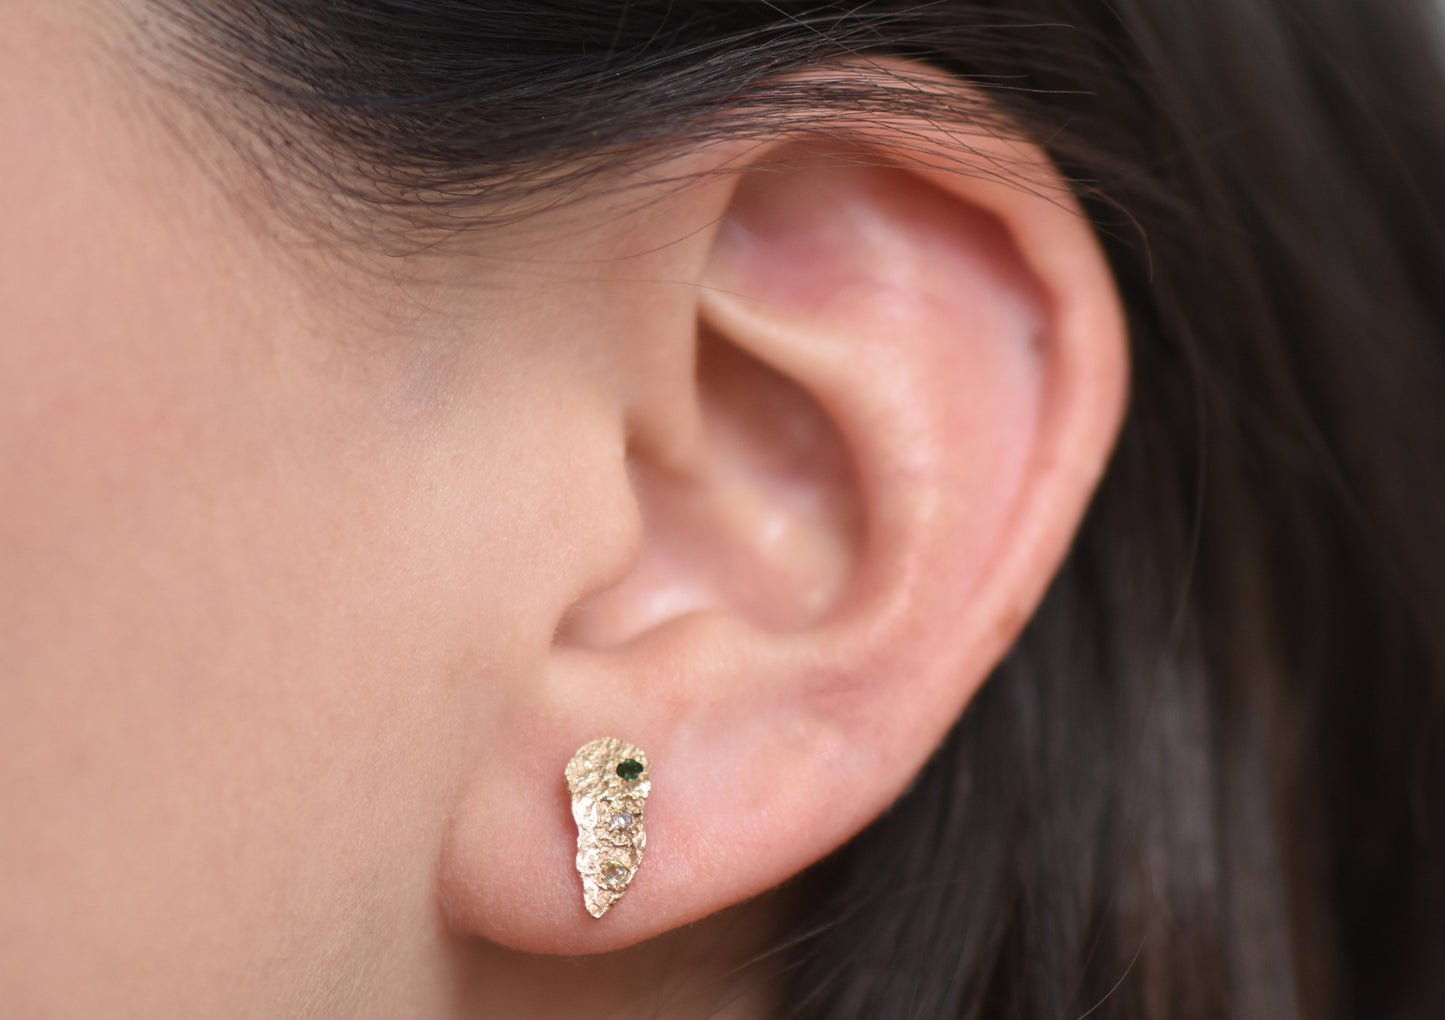 9ct Gold London Plane Wisp Studs with Stones